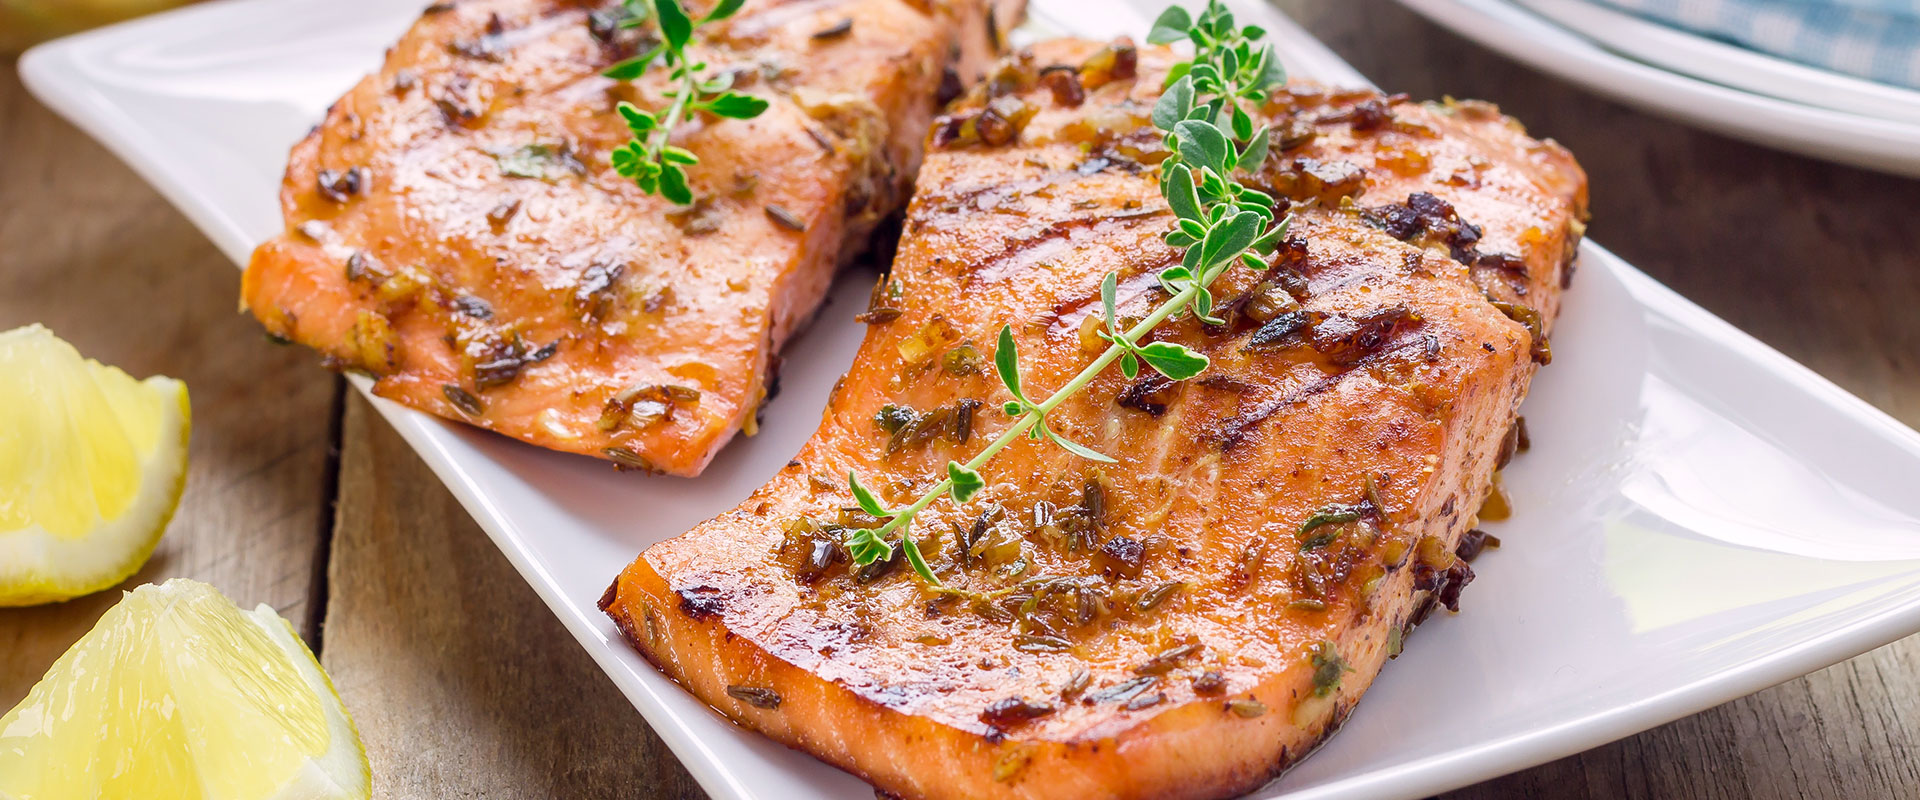 Fatty fish like salmon contain omega-3 fatty acids, which are good for your heart.